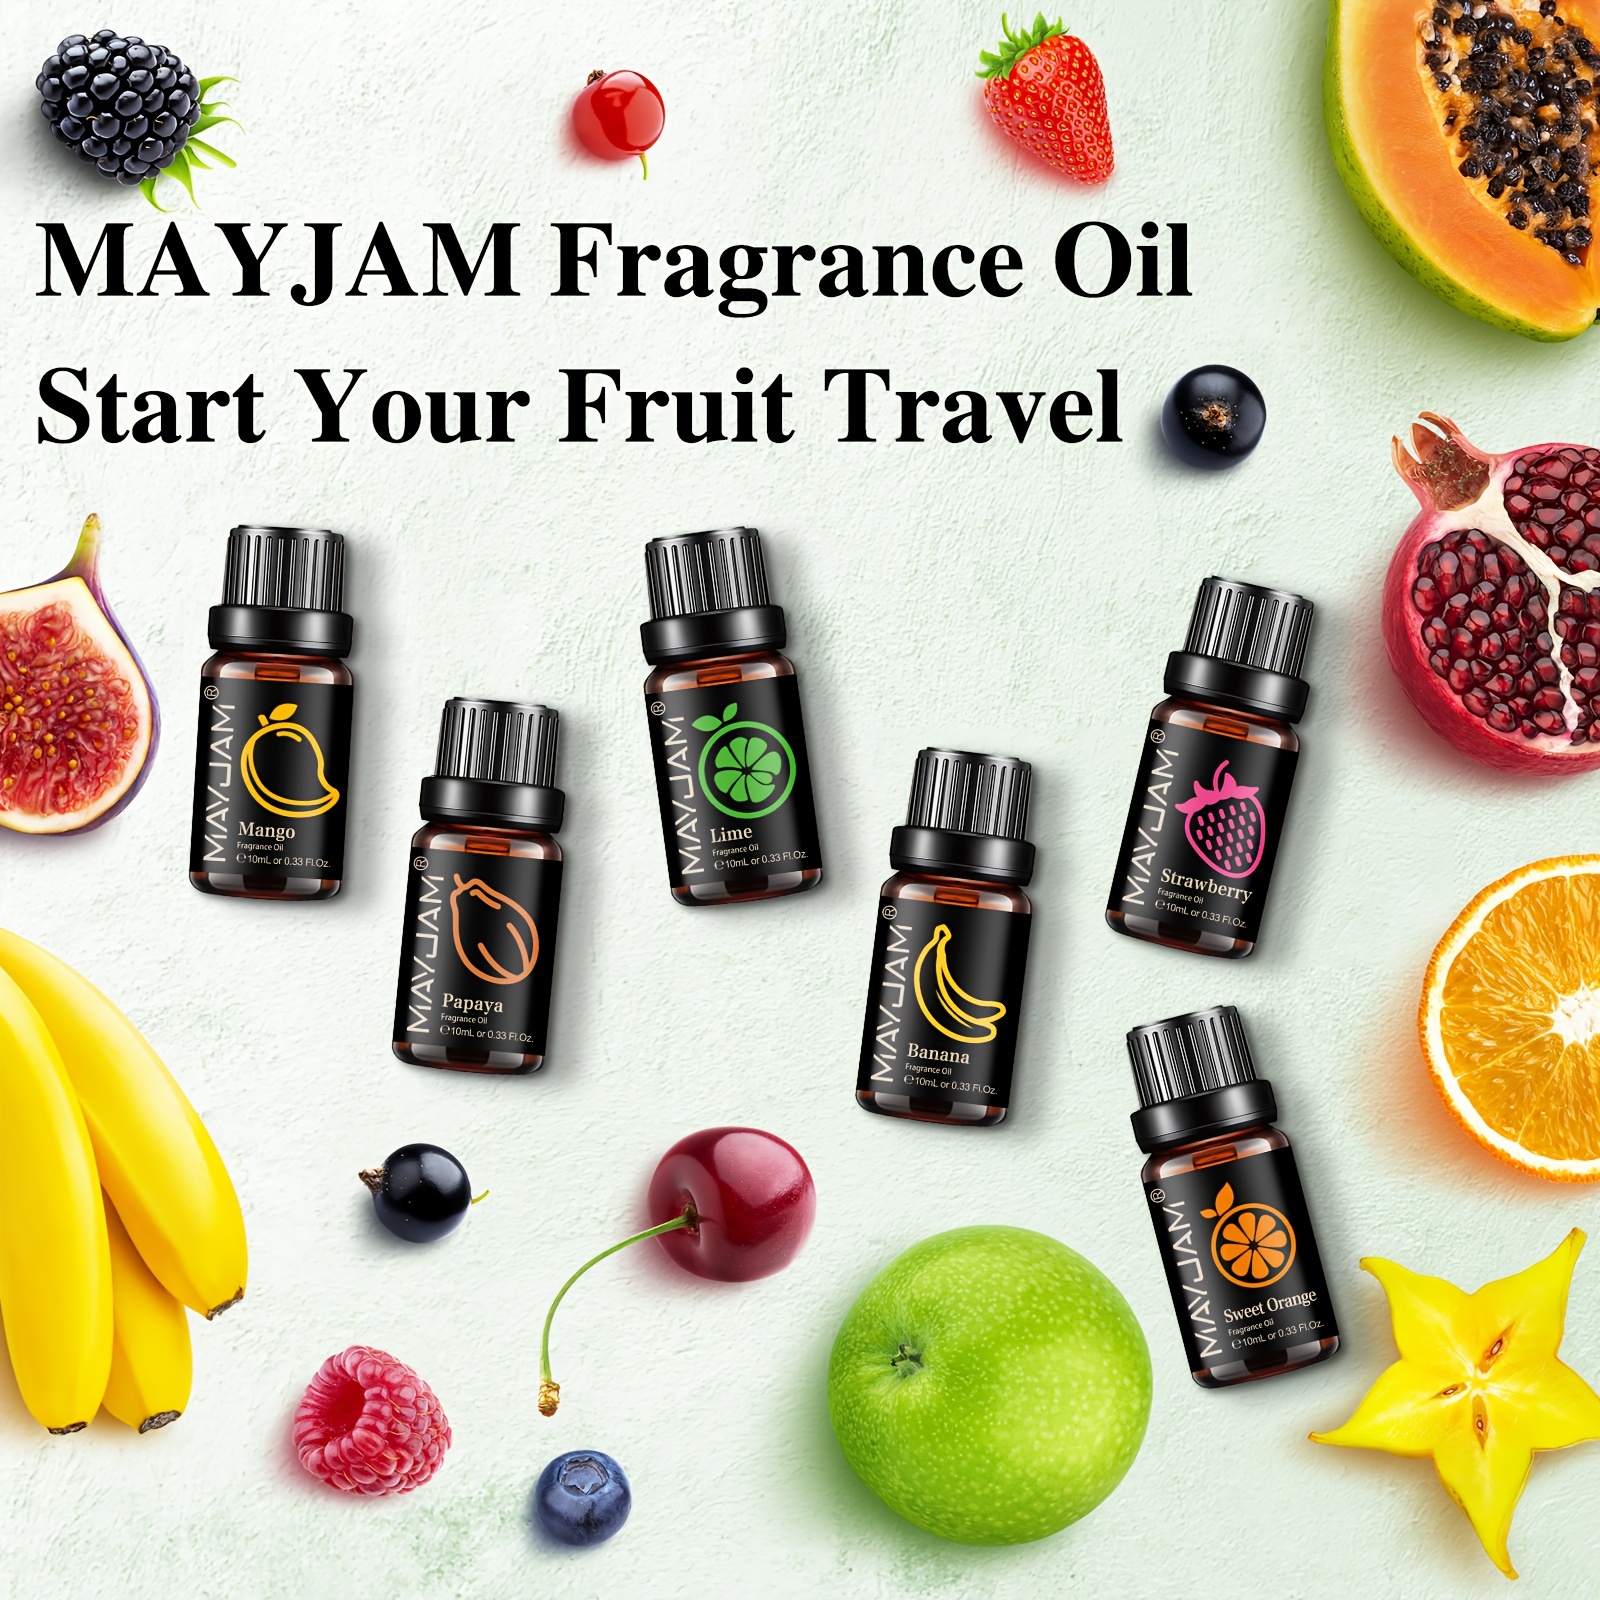 Buy 8 Get 2 Free 10ml Passion Fruit Fragrance Oil Diffuser